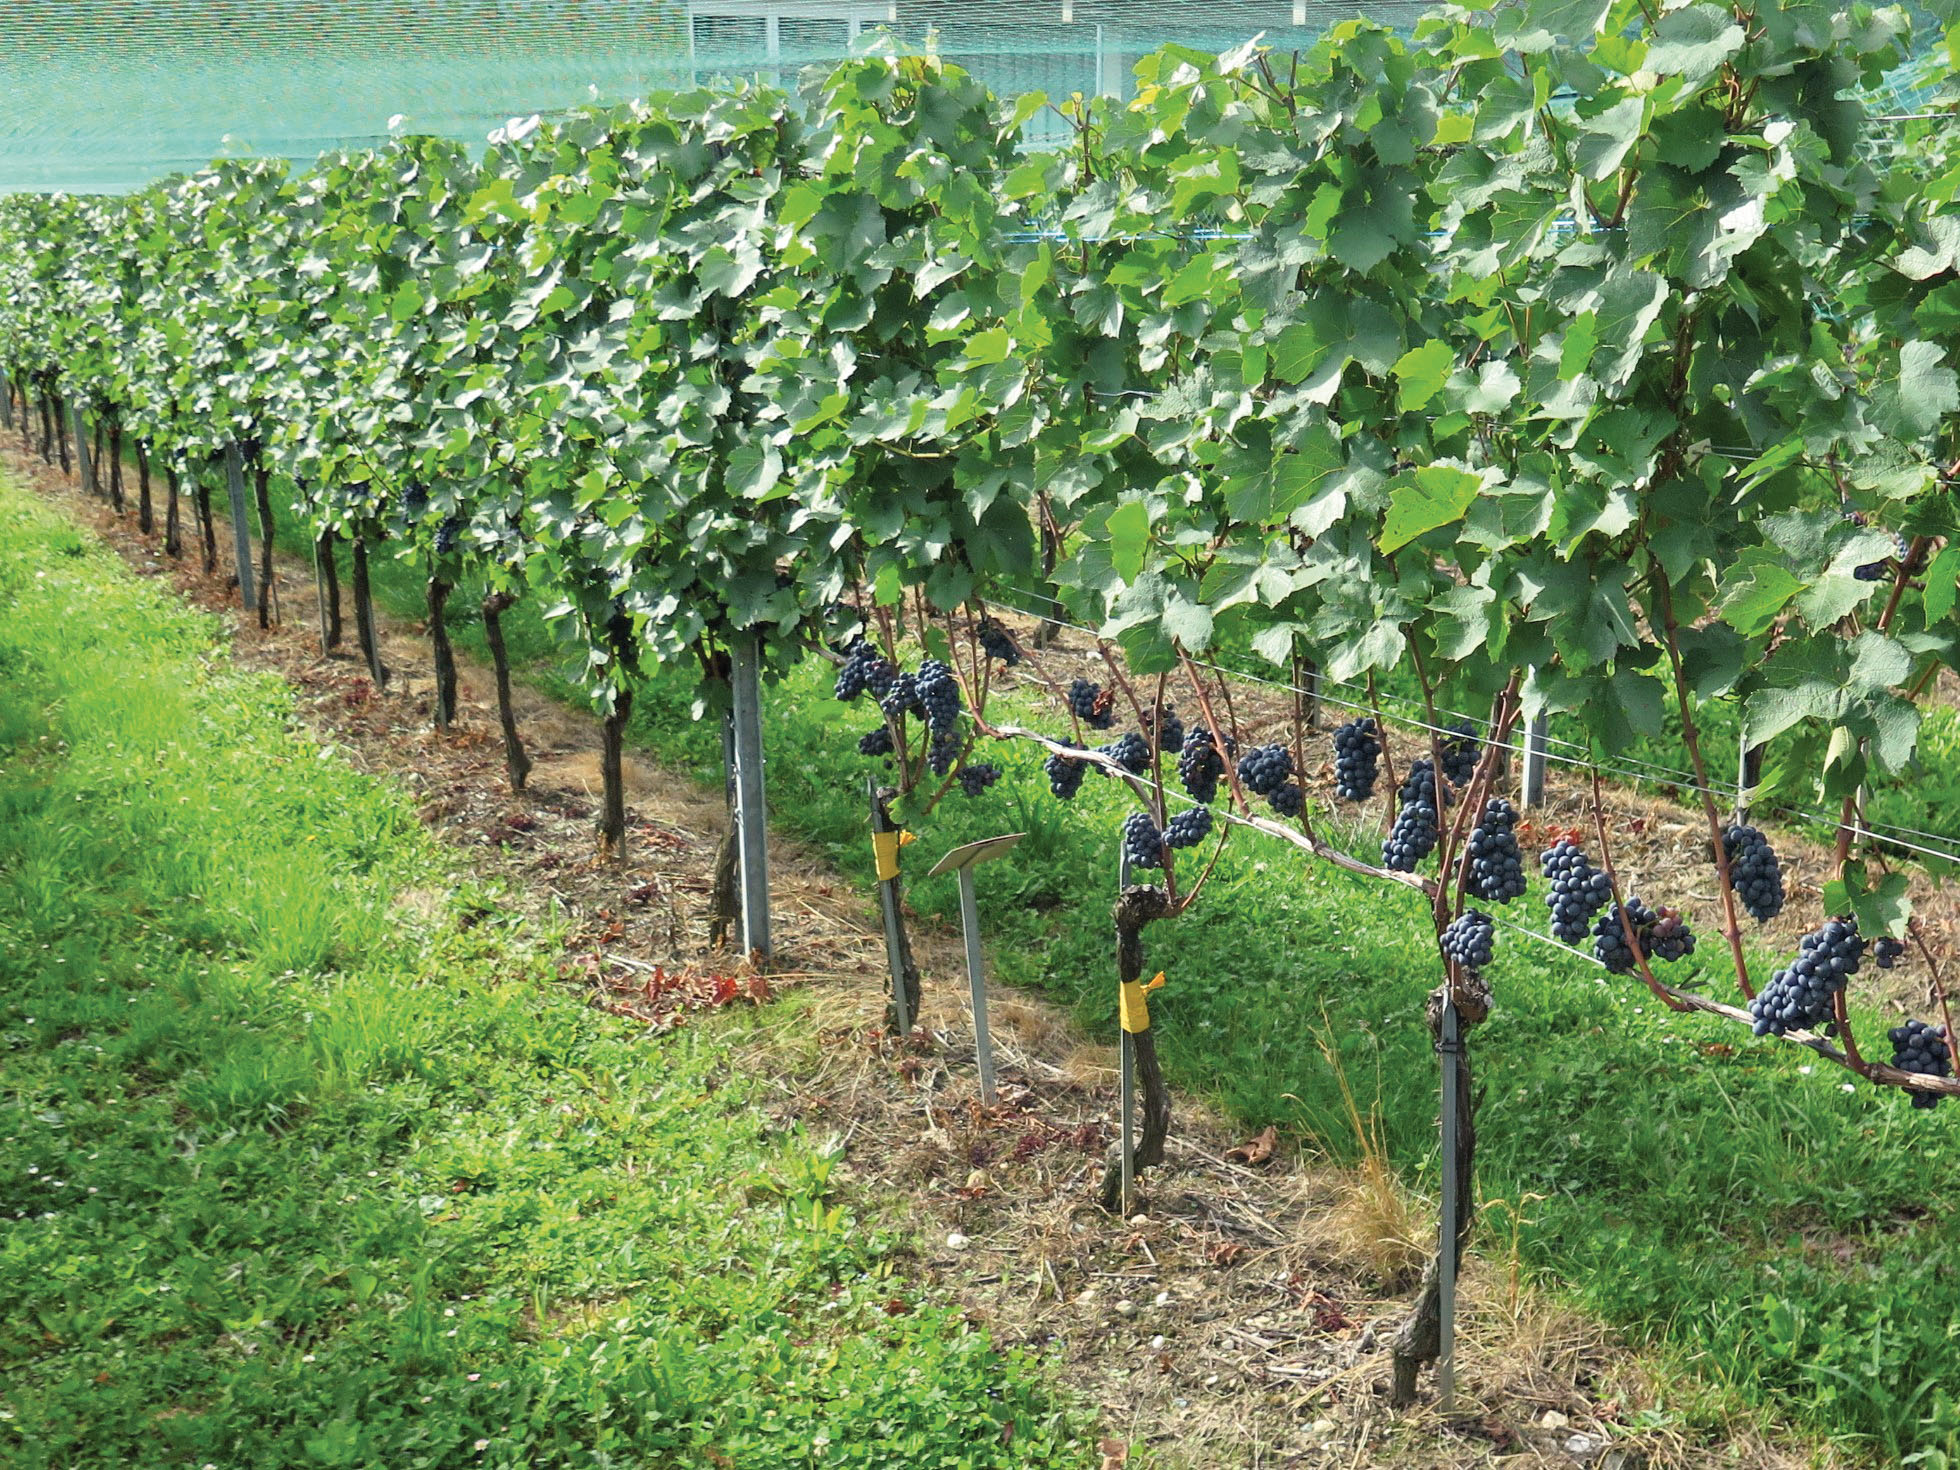 Period and intensity of vine leaf removal: Assessment of five grape varieties in Switzerland